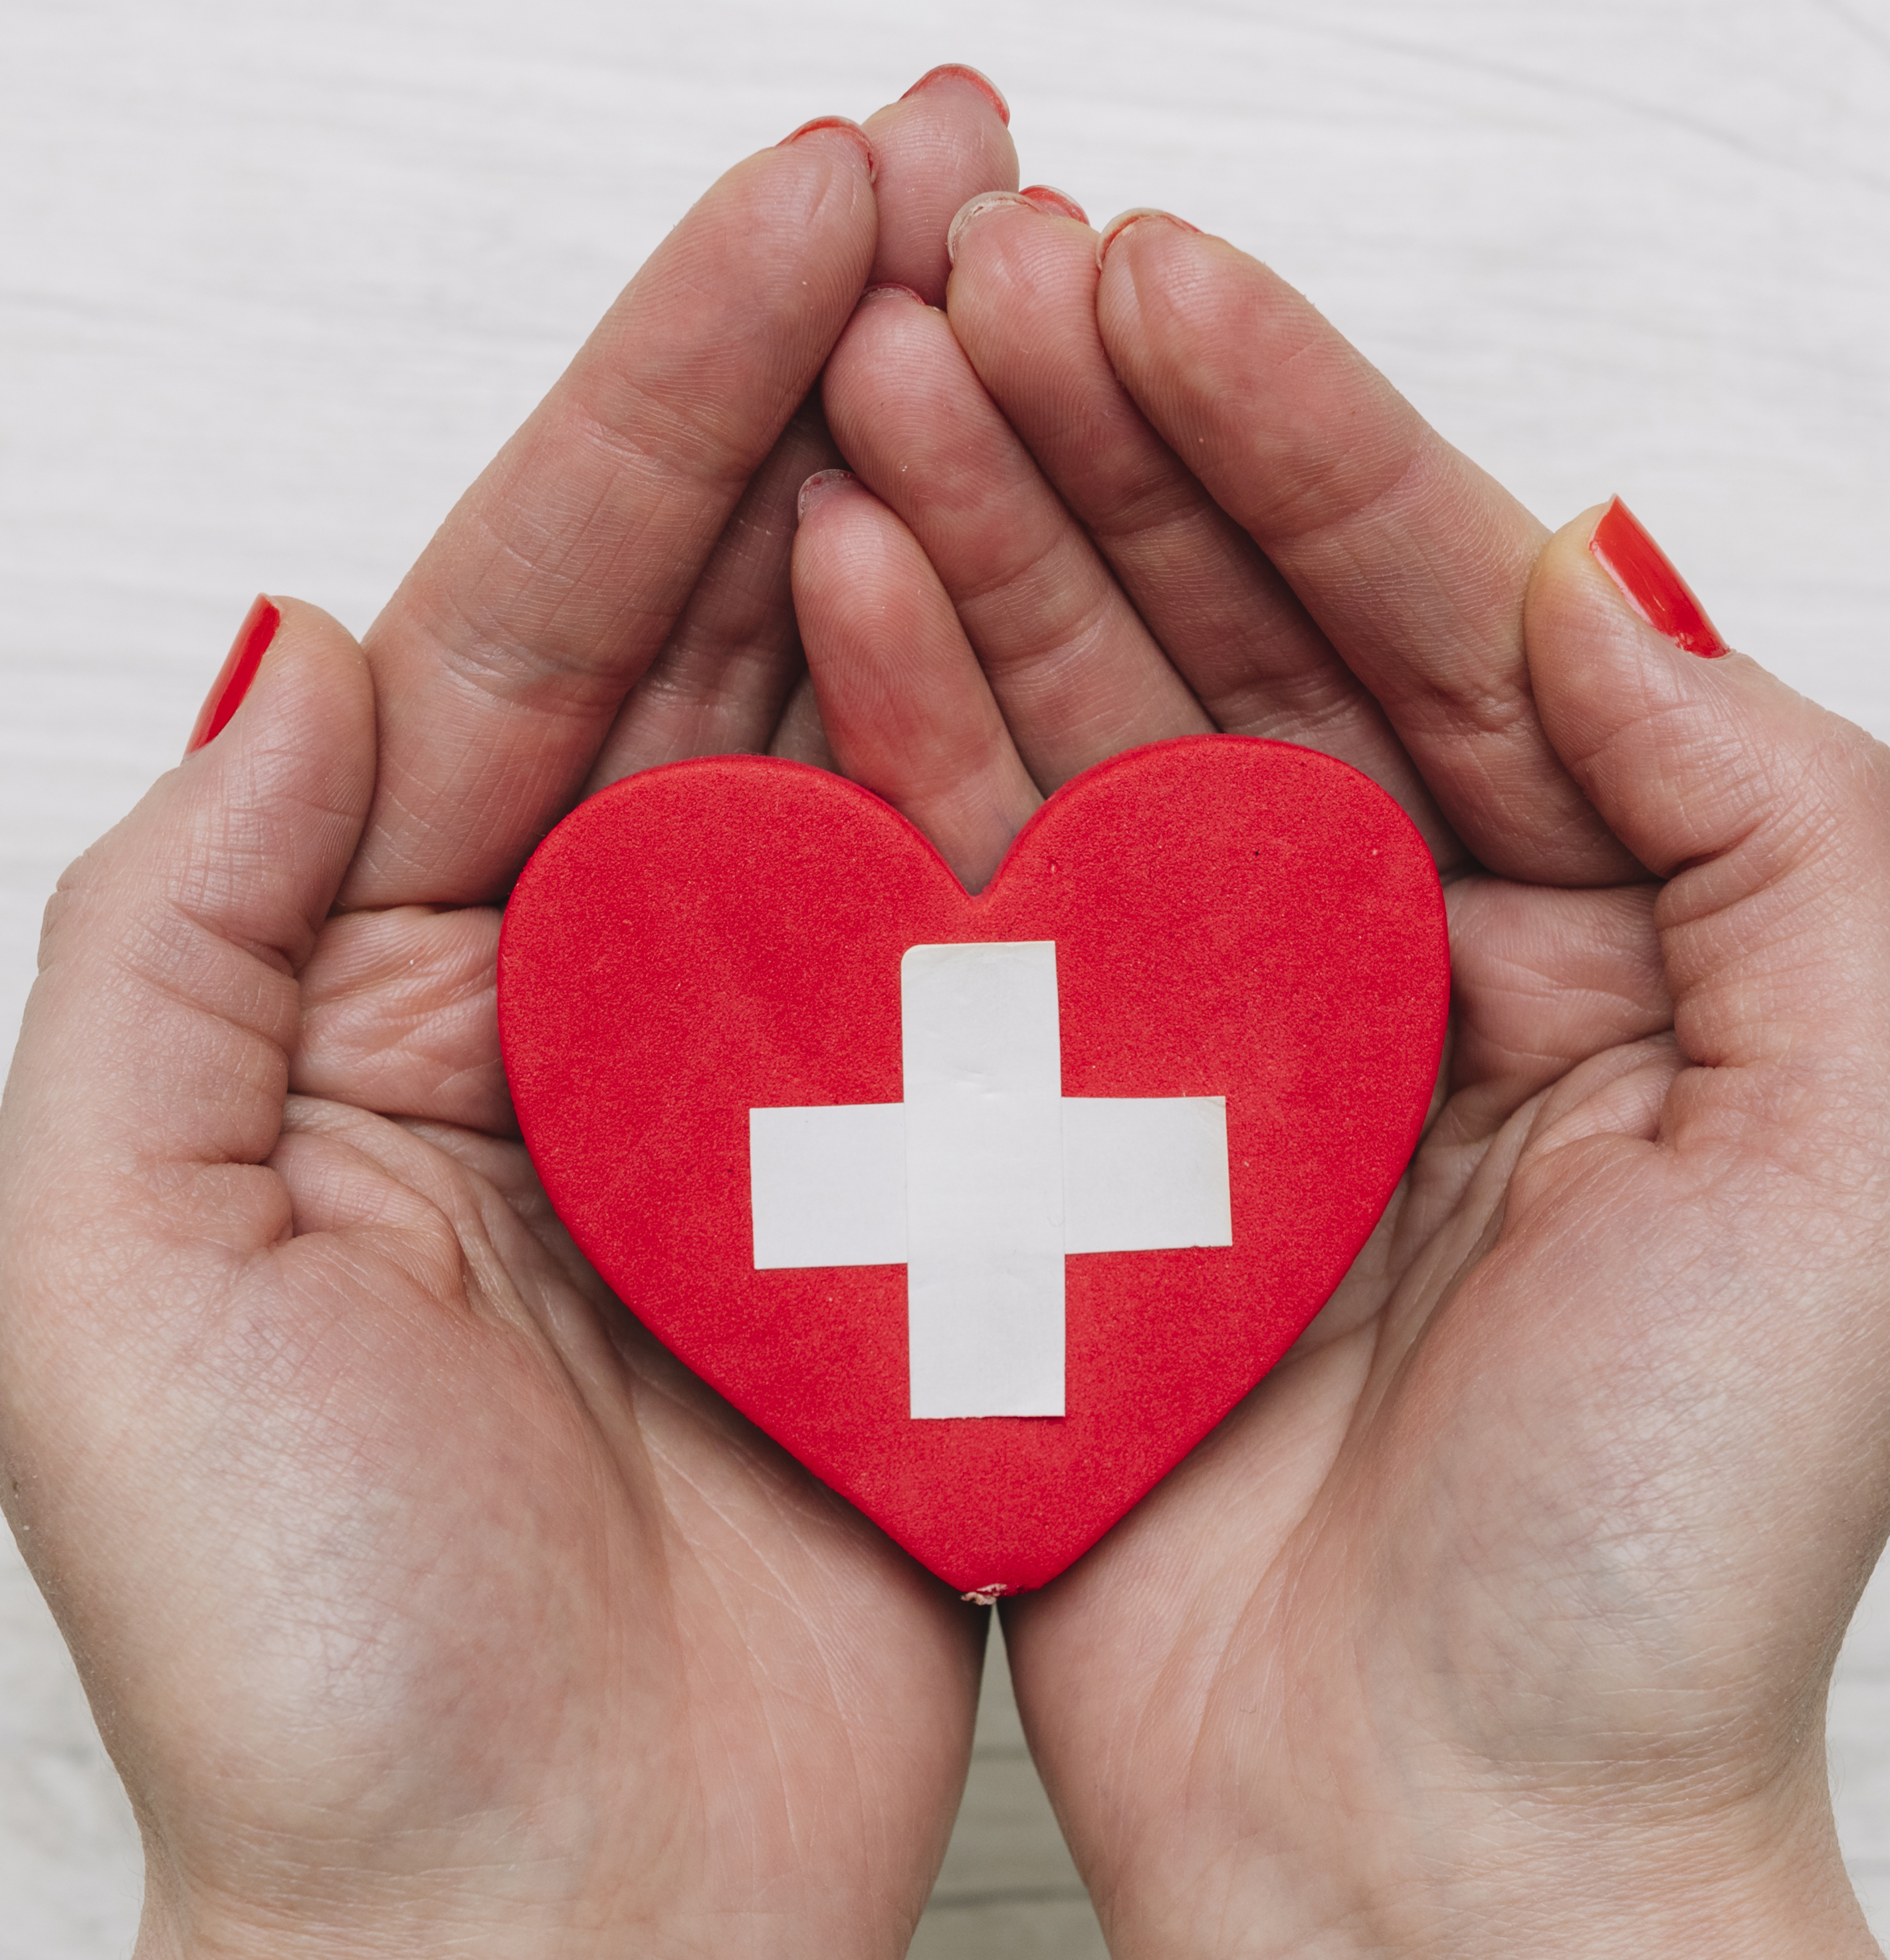 hands holding heart with first aid symbol